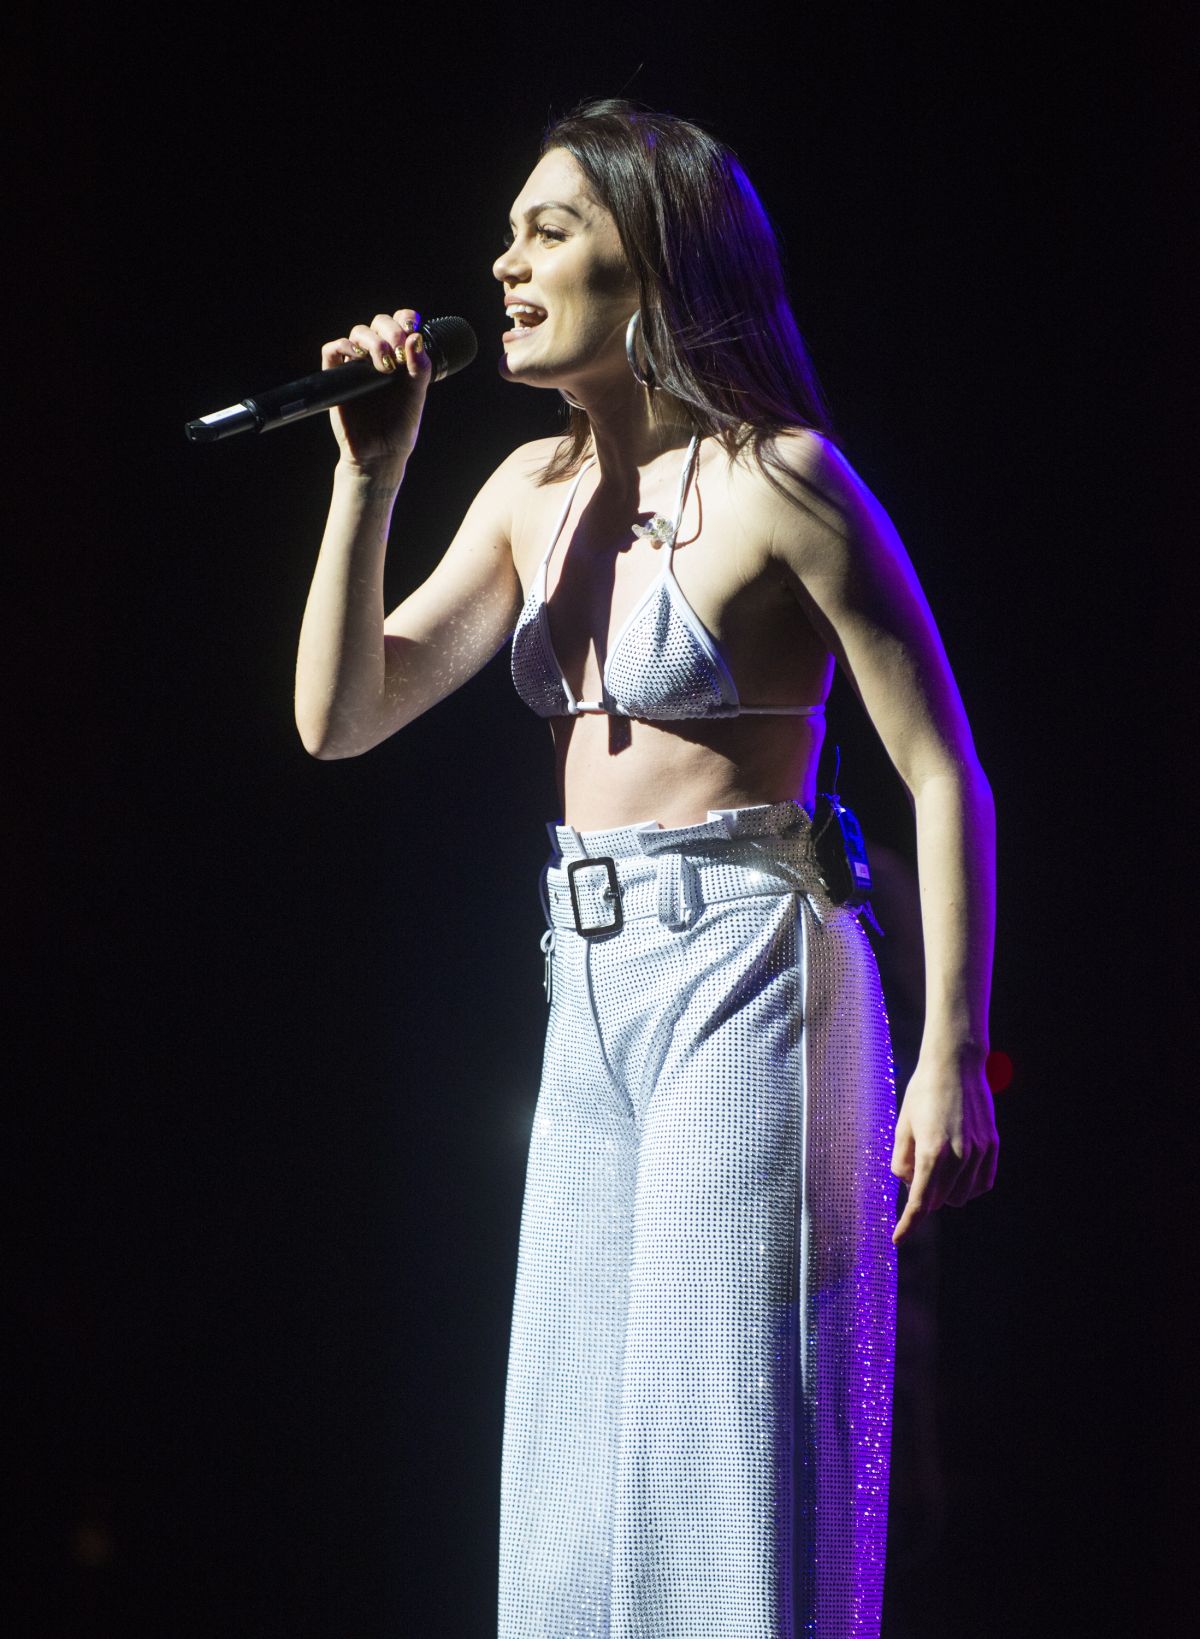 jessie-j-performs-at-new-theatre-in-oxford-11-17-2018-1.jpg